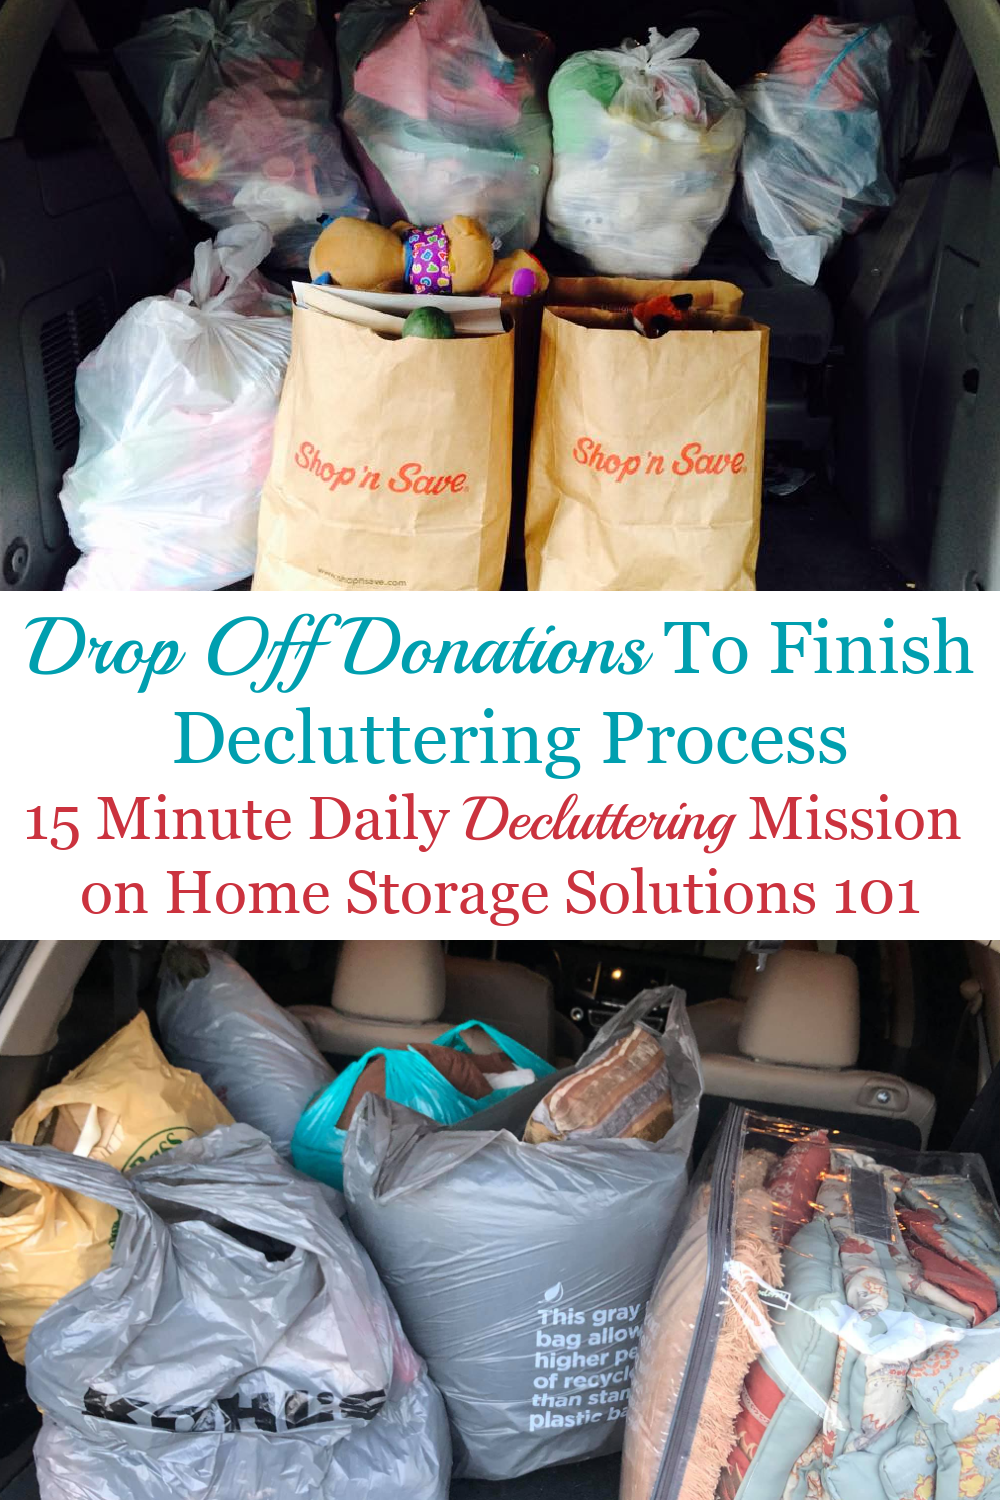 https://www.home-storage-solutions-101.com/image-files/drop-off-donations-mission-pinterest-image.png